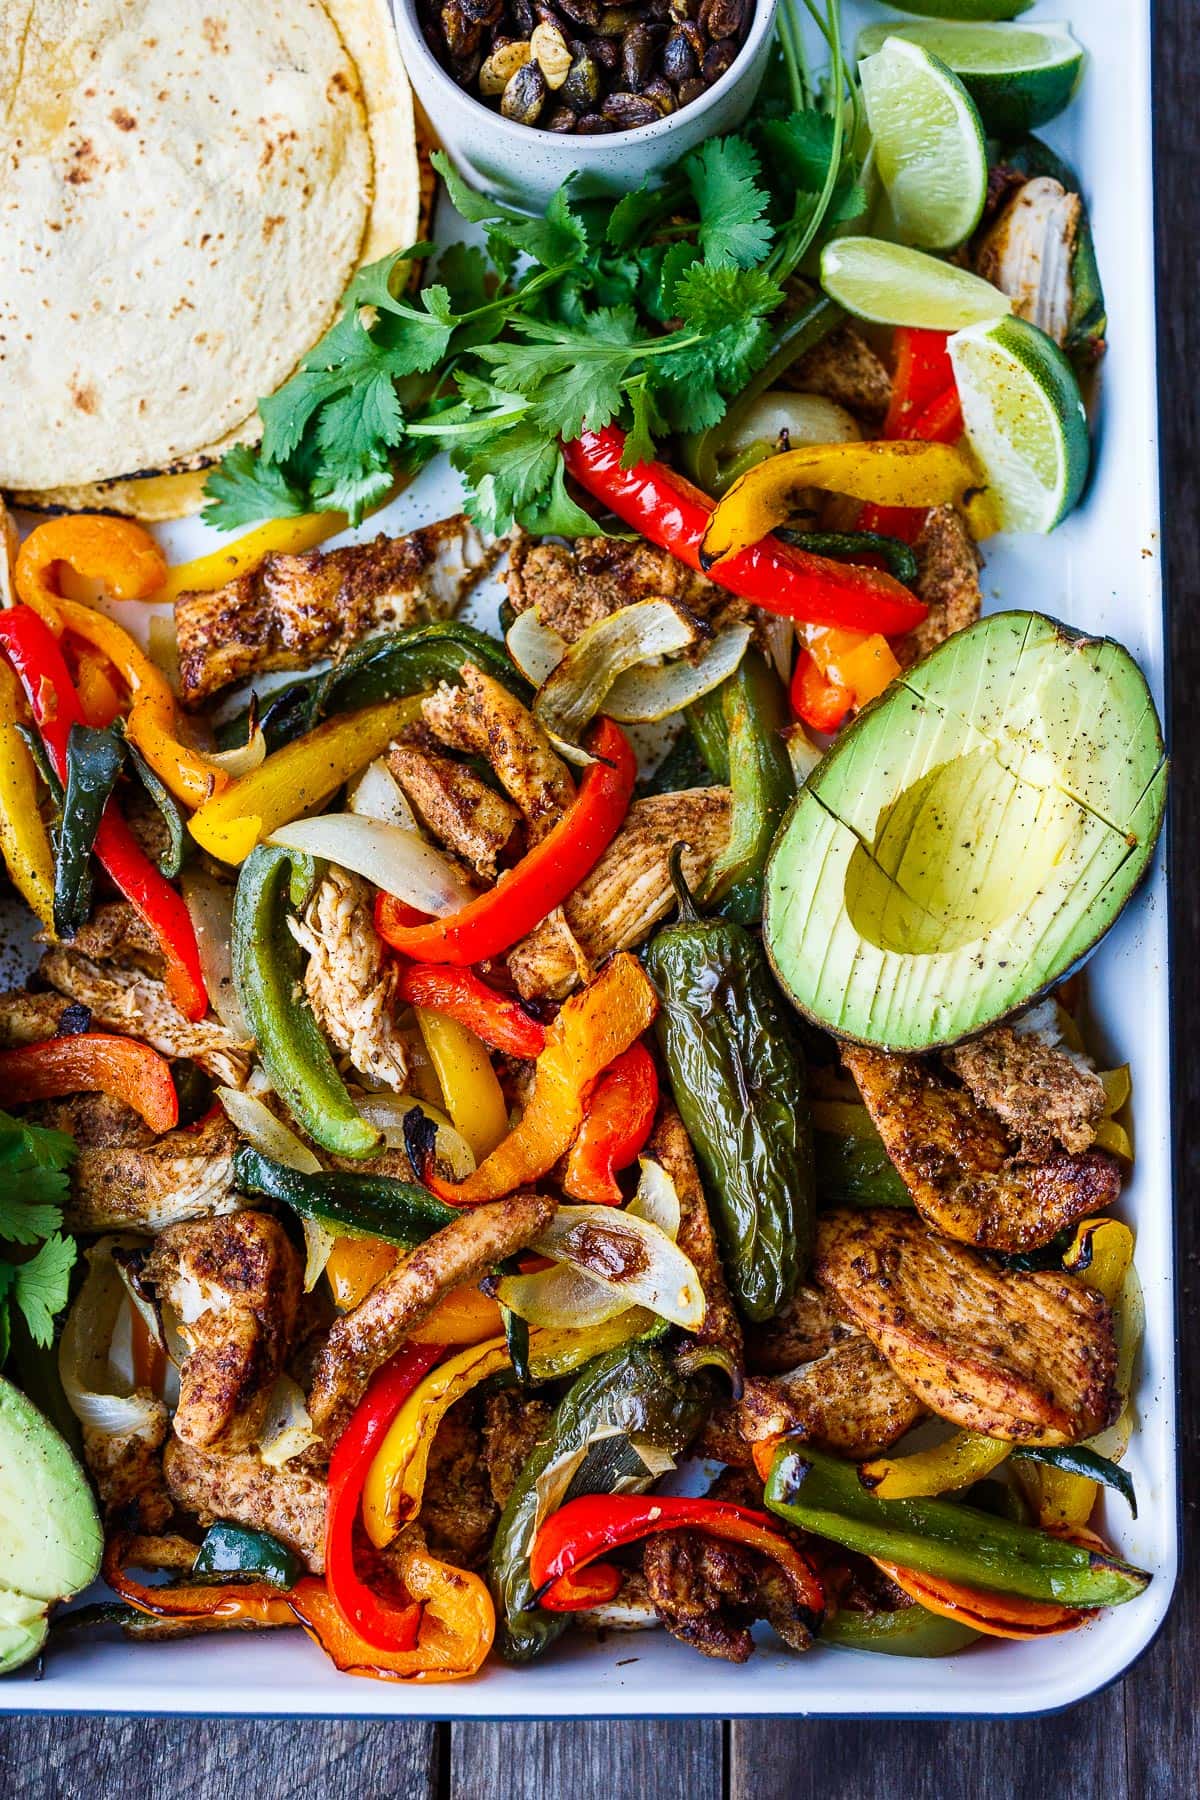 Sheet Pan Chicken Fajitas are a quick, easy, one-pan dinner!  Deliciously marinated chicken and vegetables are fried until tender and juicy.